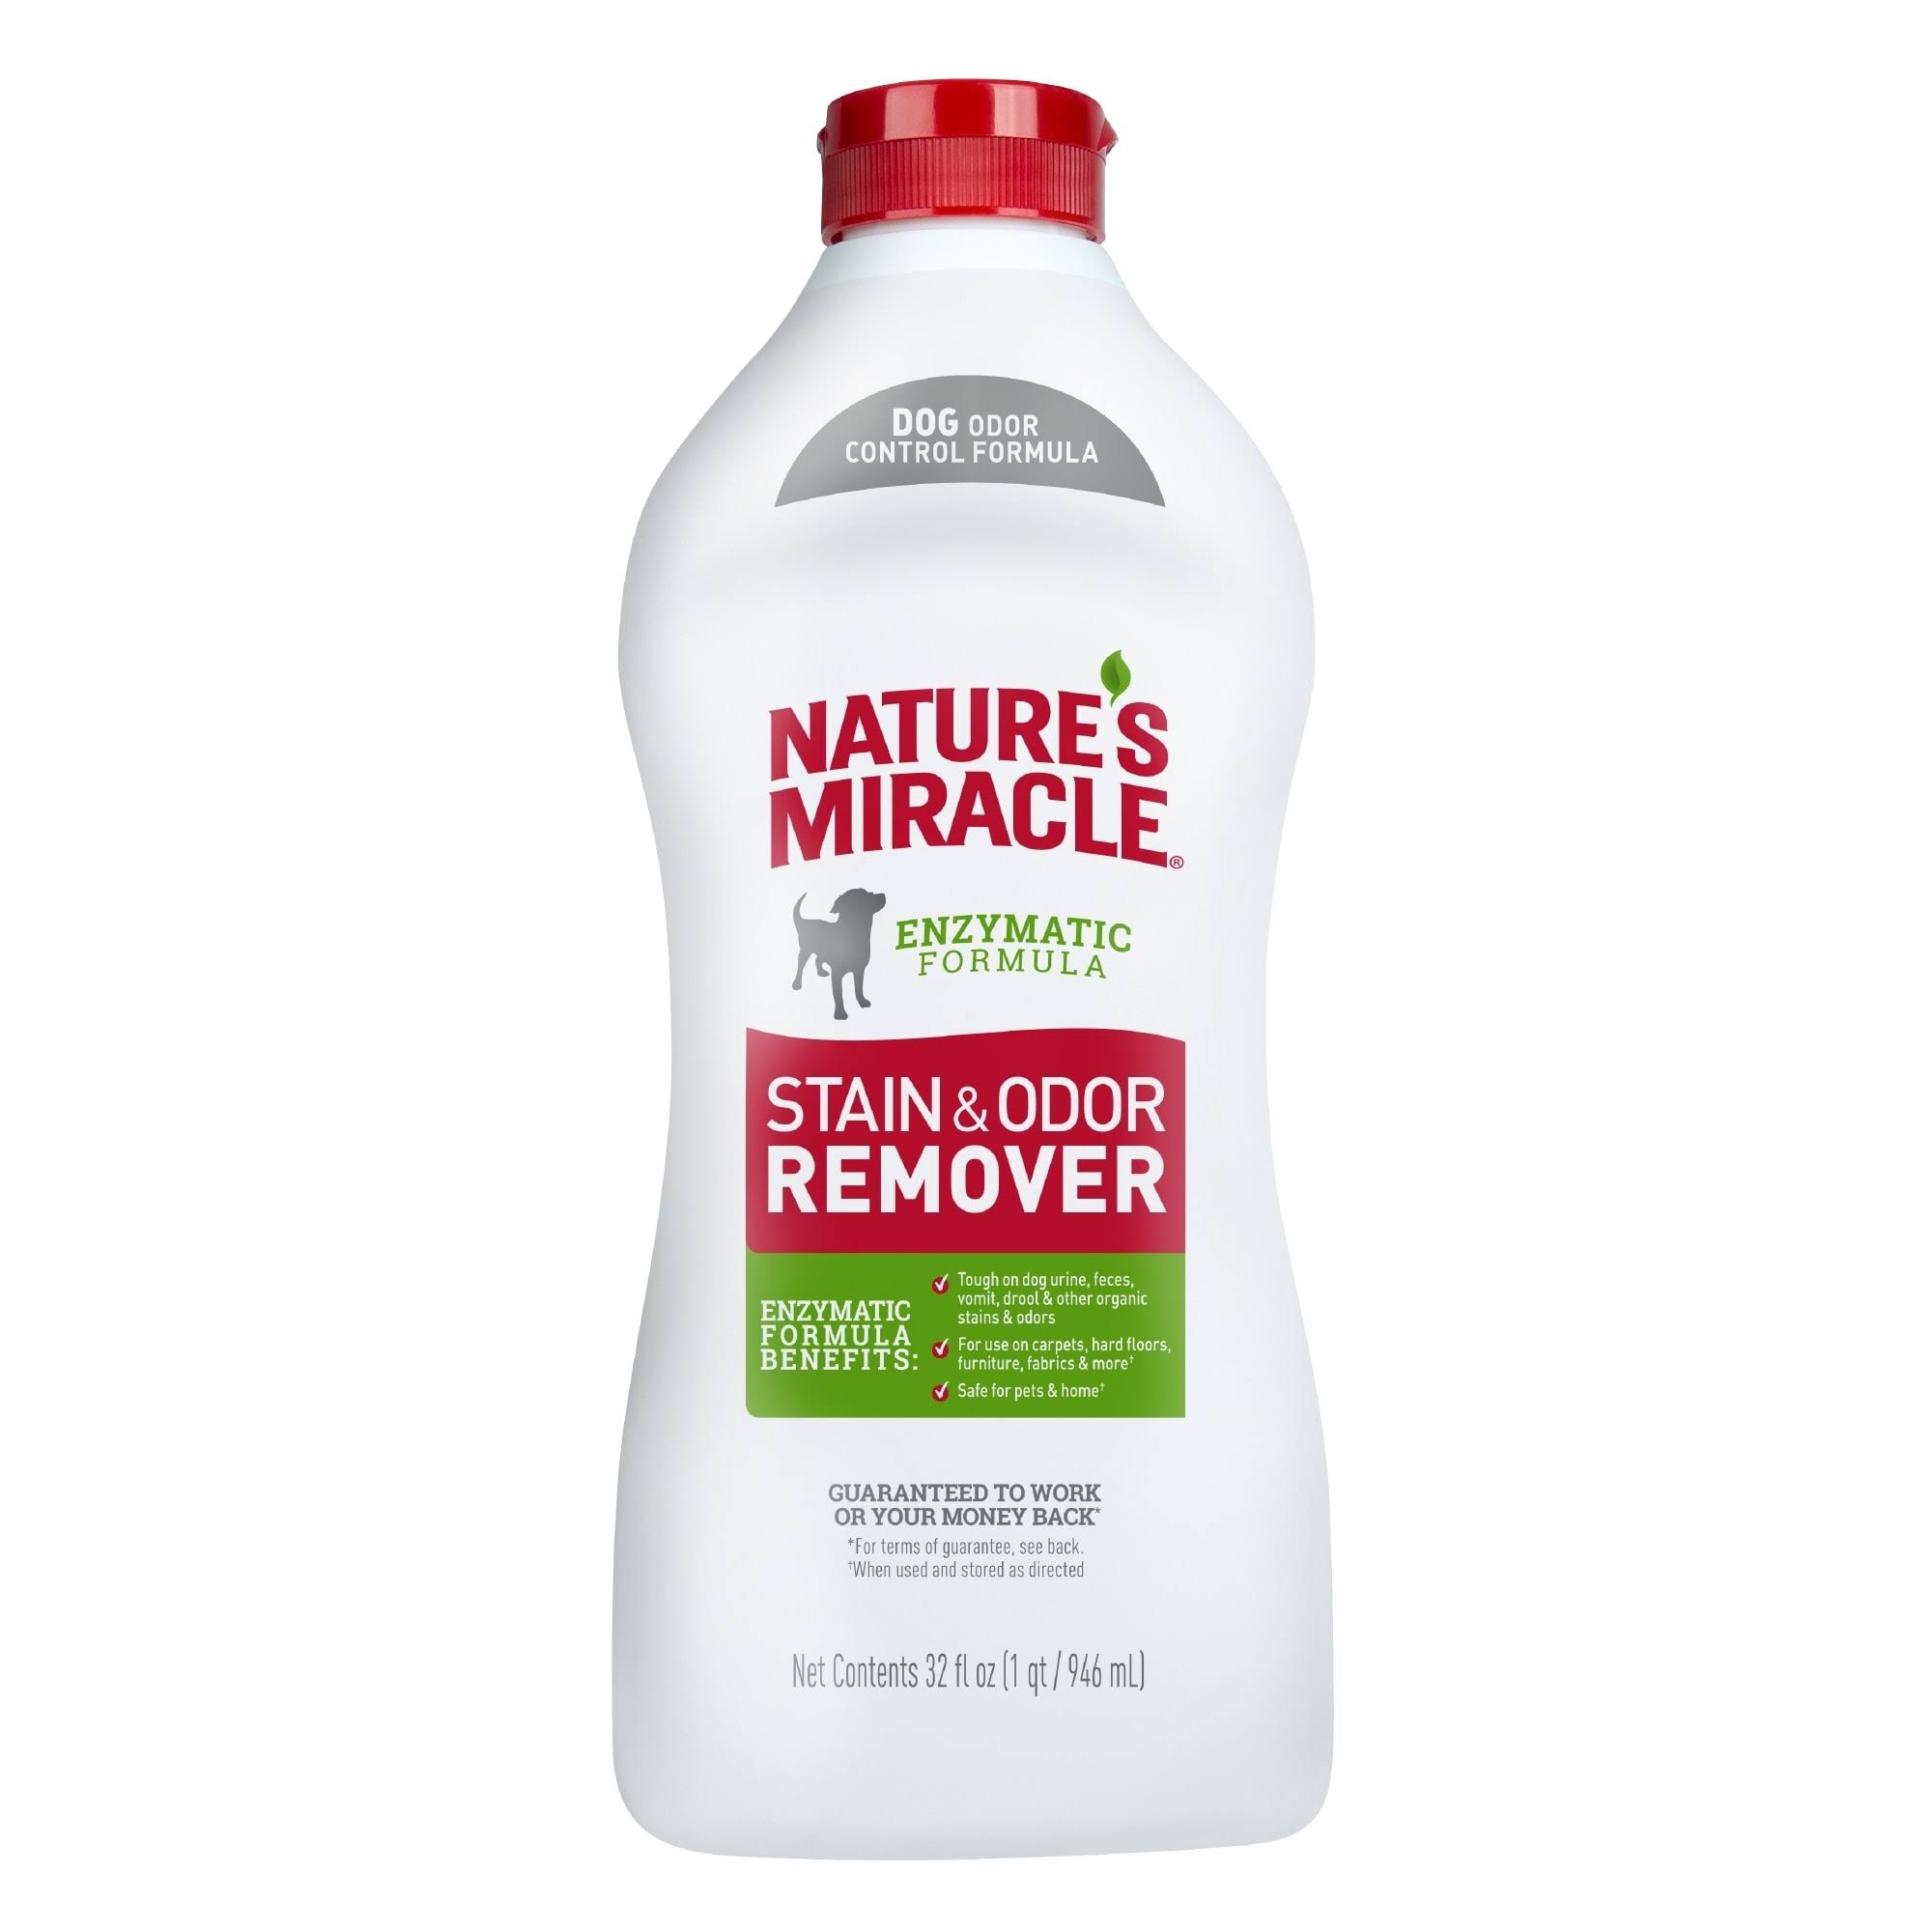 Nature's Miracle Stain & Odor Remover, Enzymatic Formula - 32 fl oz